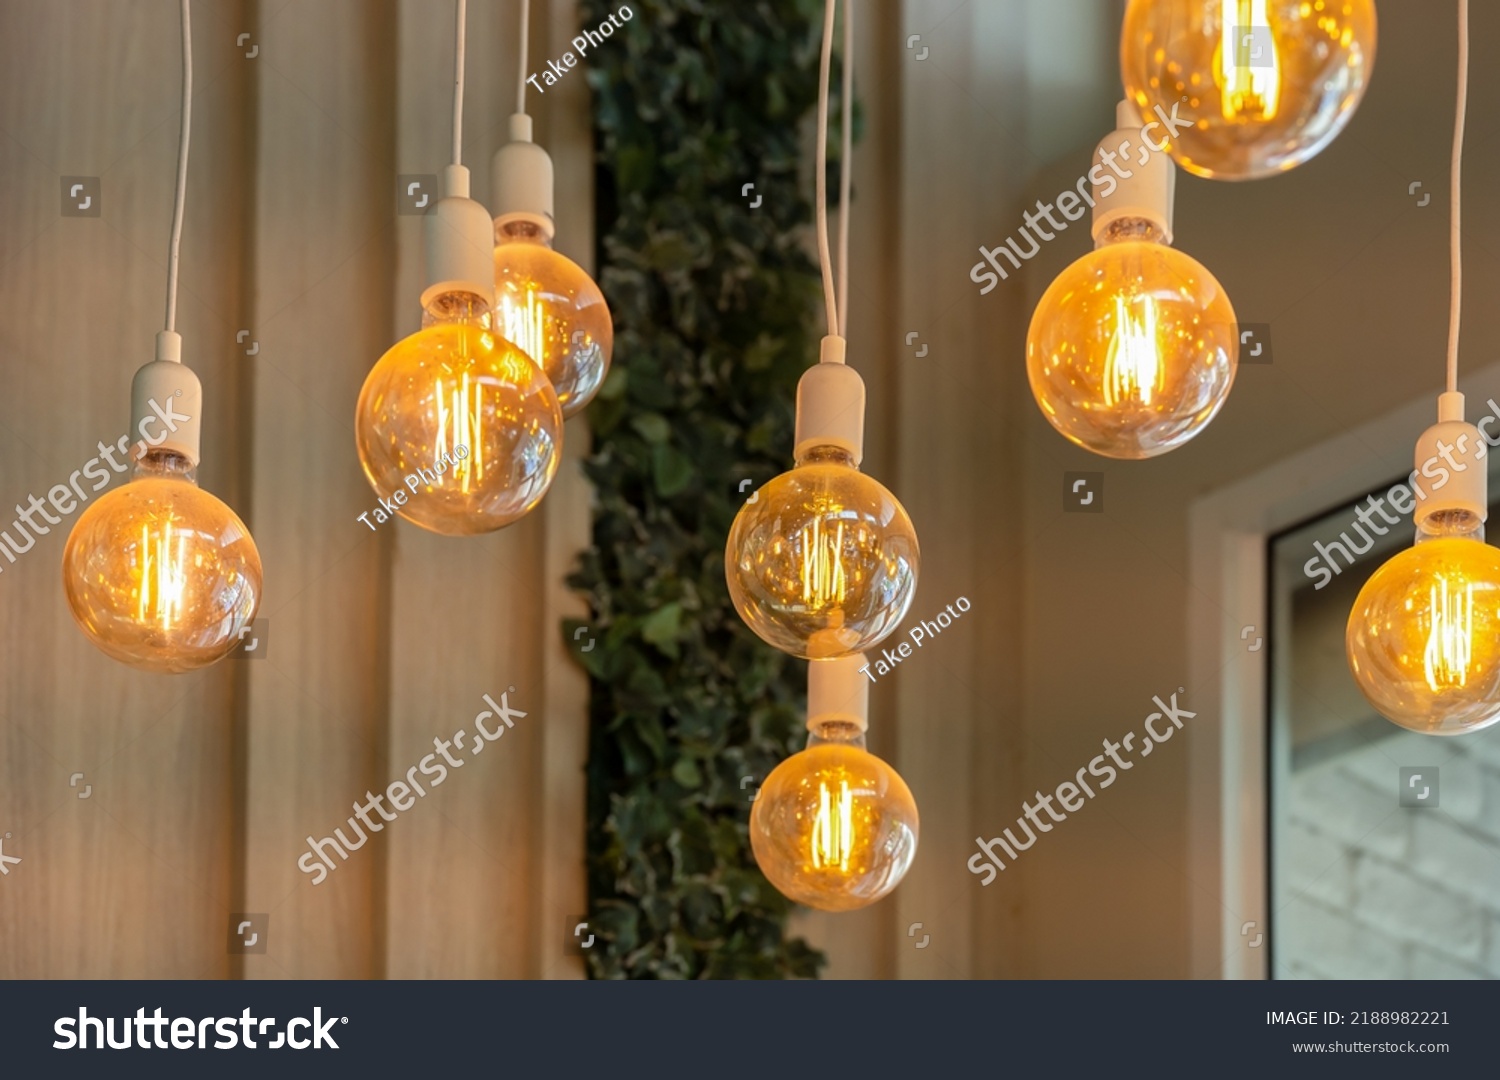 Vintage tungsten filament multiple lamps hanging from the ceiling on a white wires as an interior design concept. Energy and design concept #2188982221